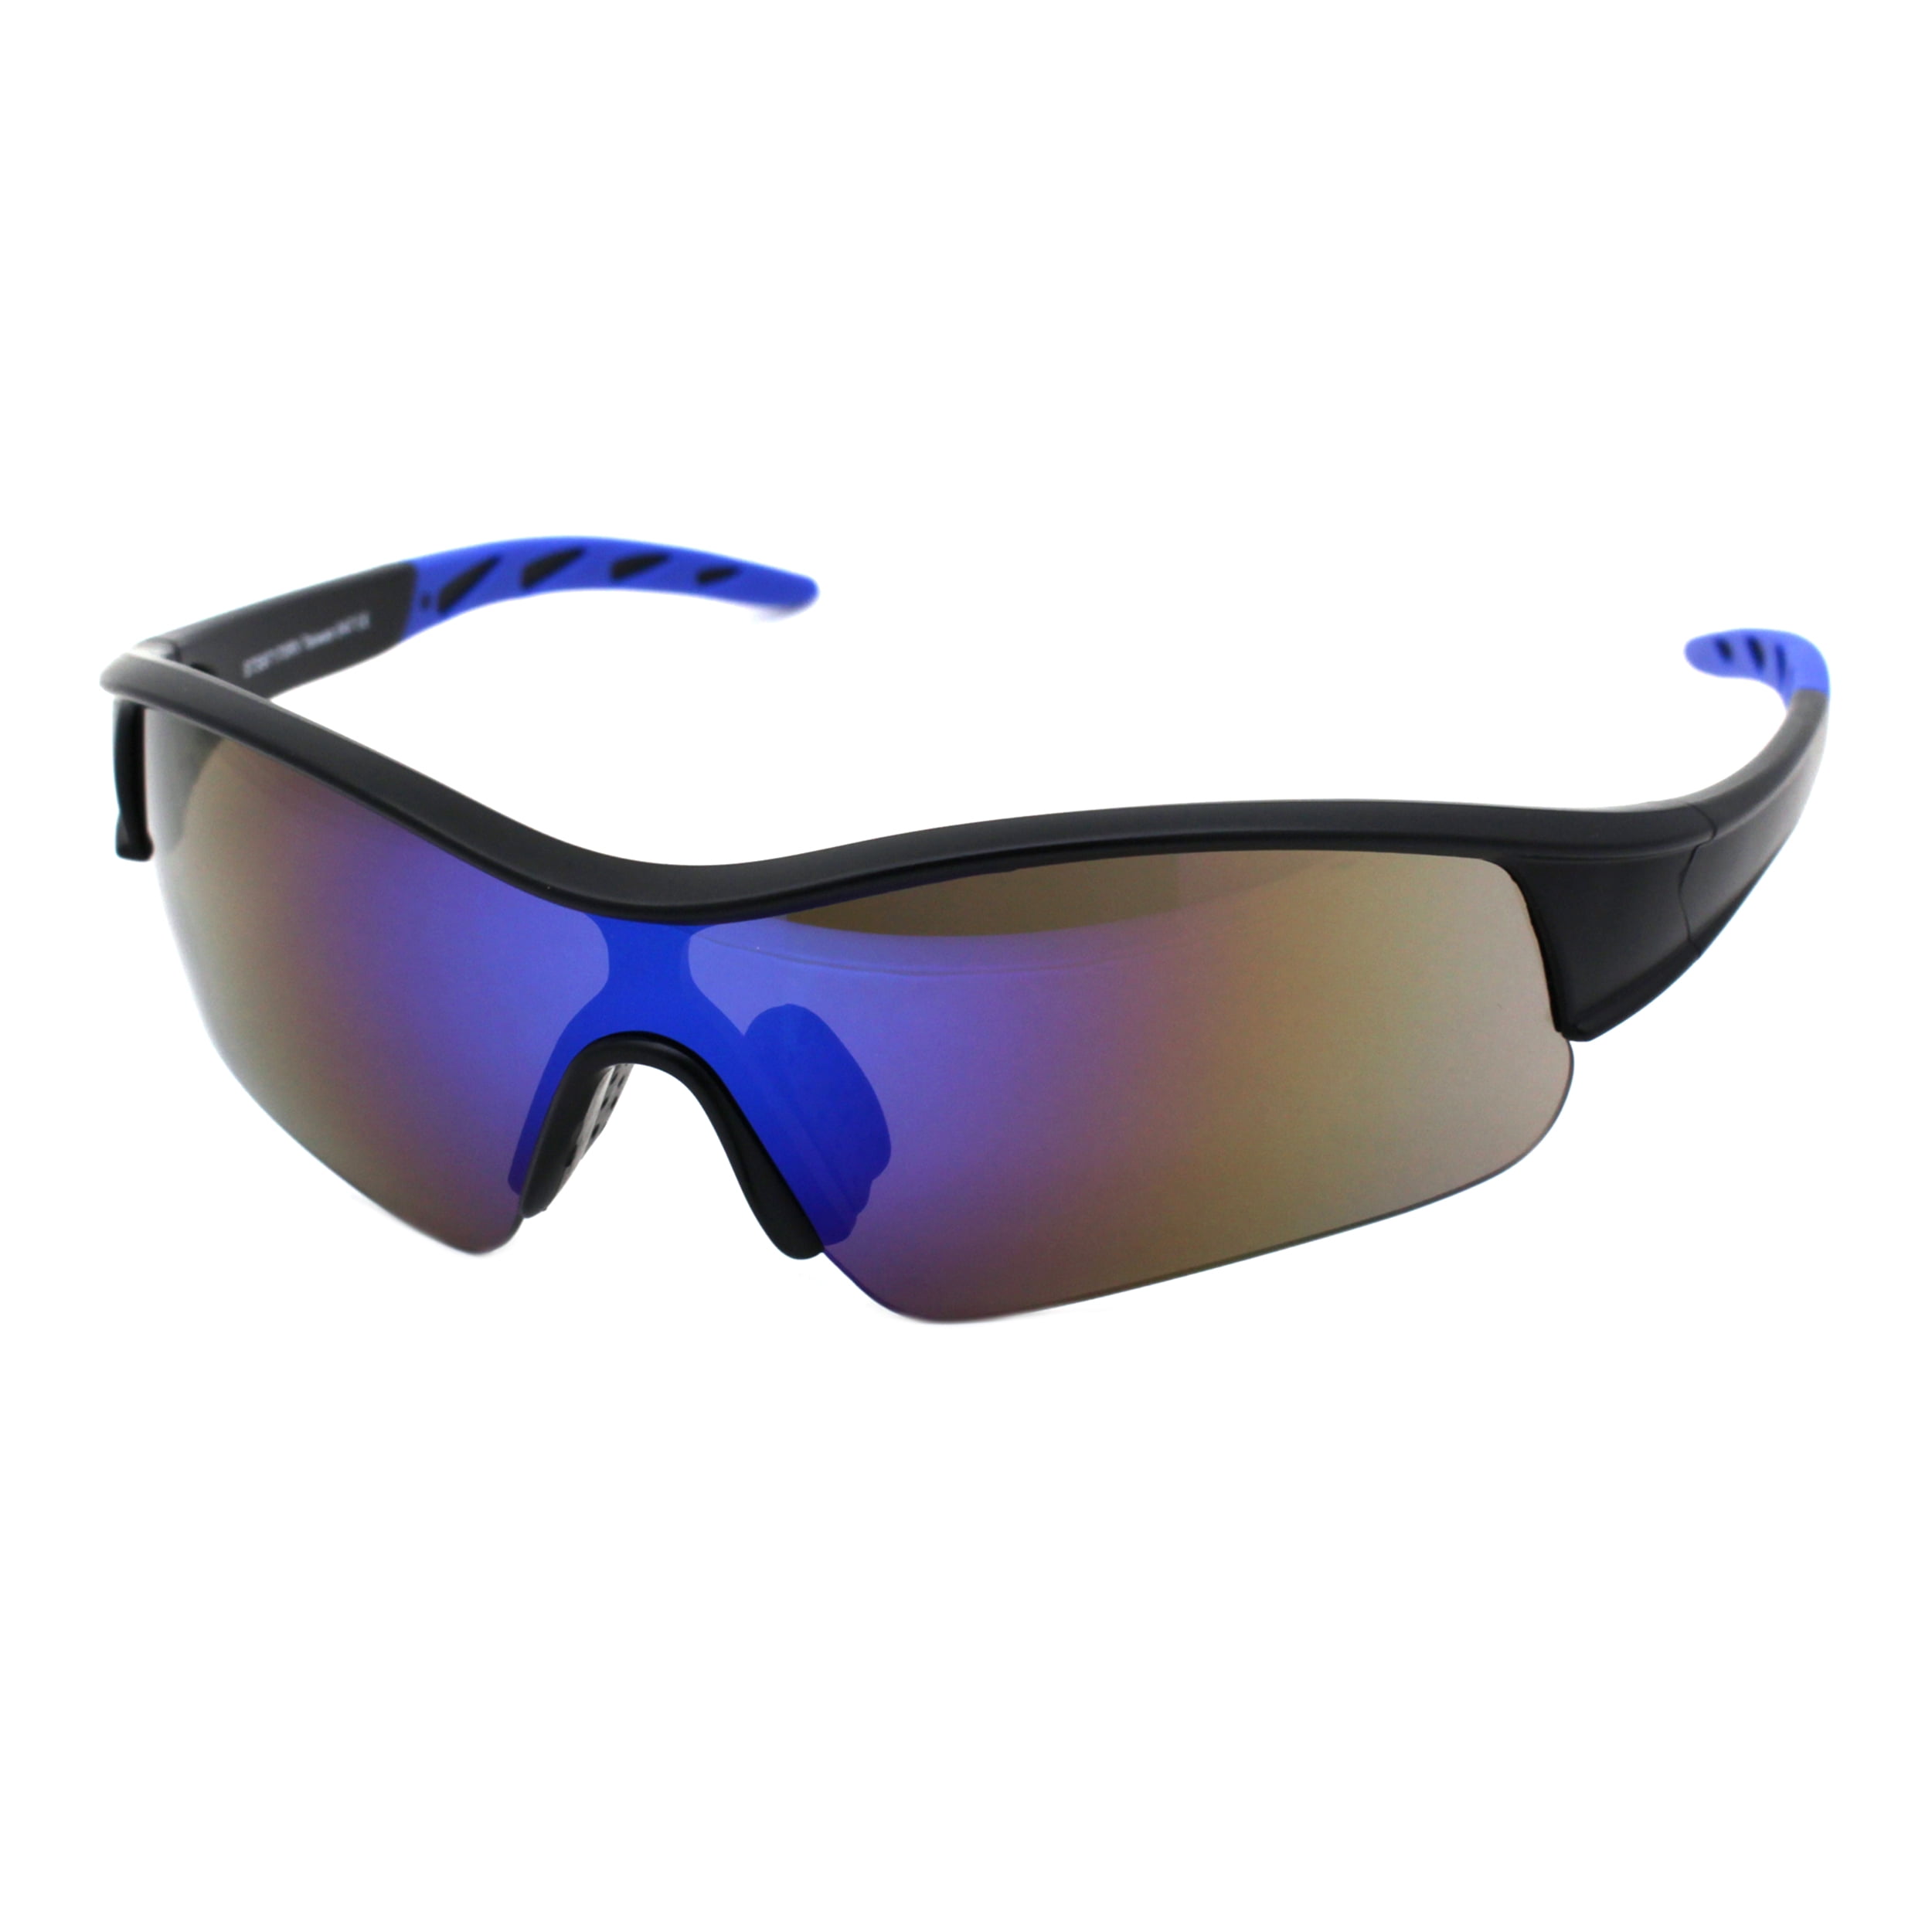 ANSI Z87.1+ Protective Safety Sunglasses Mirrored Lens Light Wrap Half ...